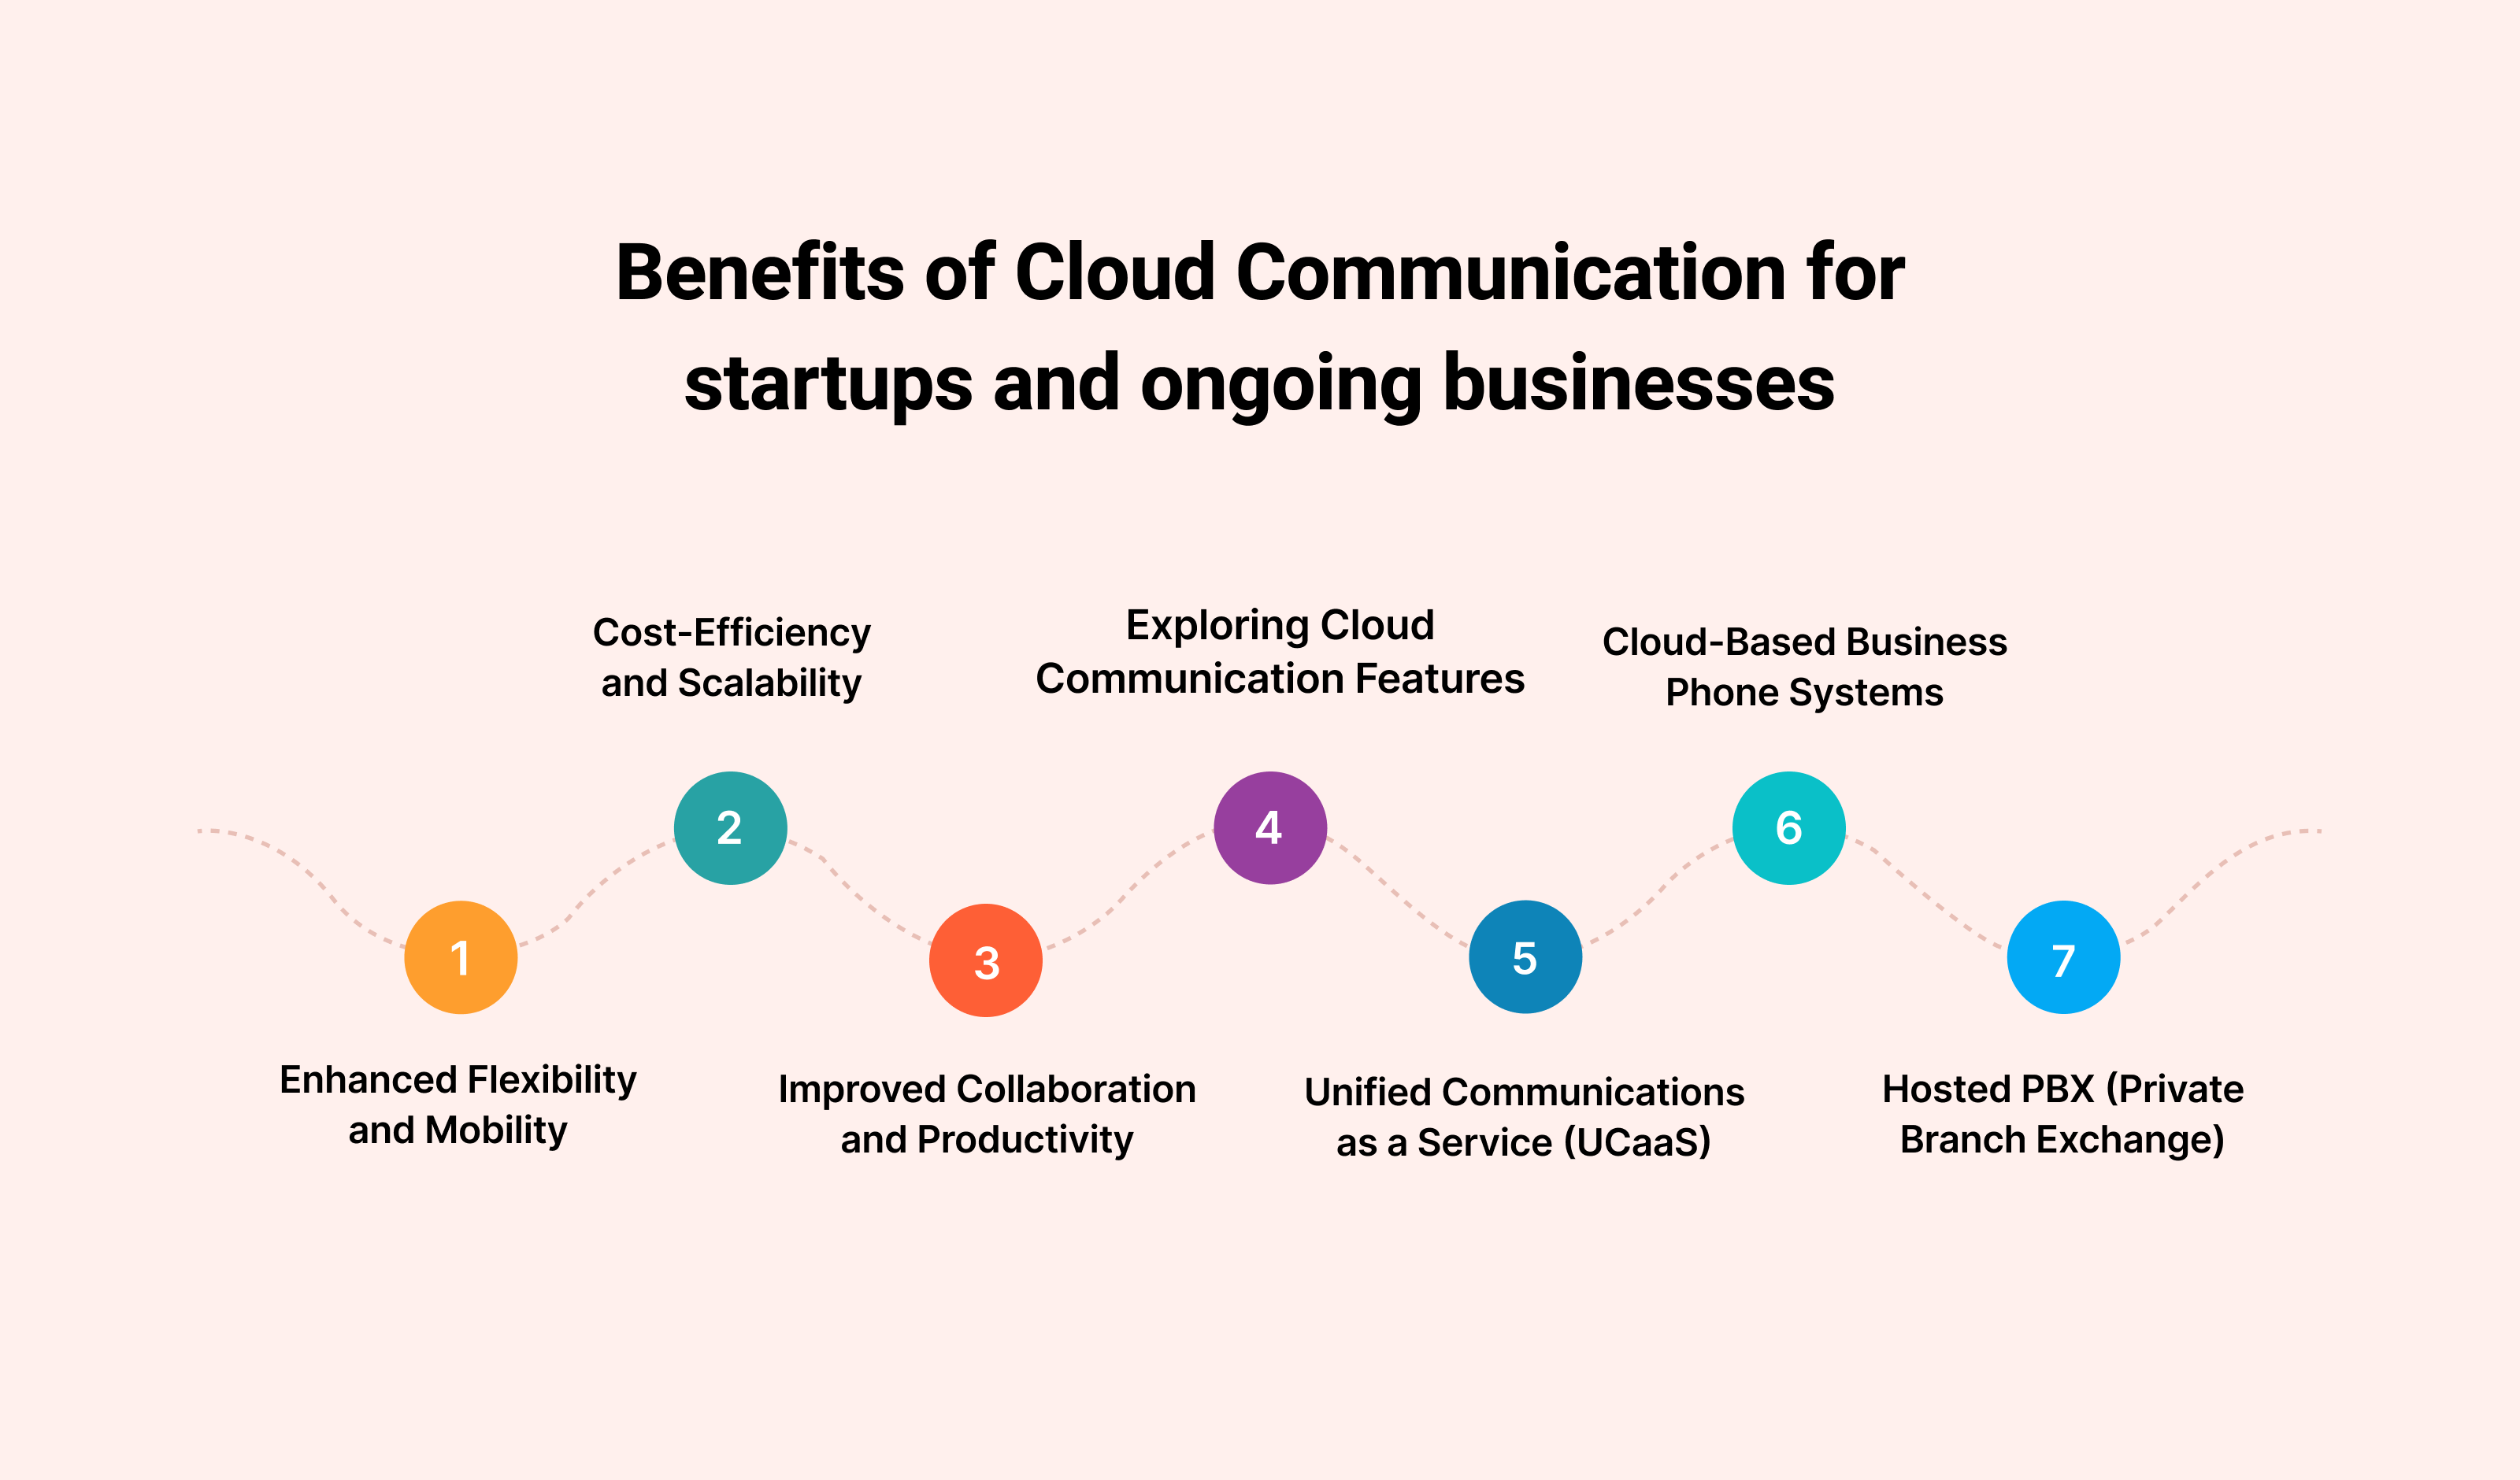 Benefits of Cloud Communication for Startups and Ongoing Businesses: